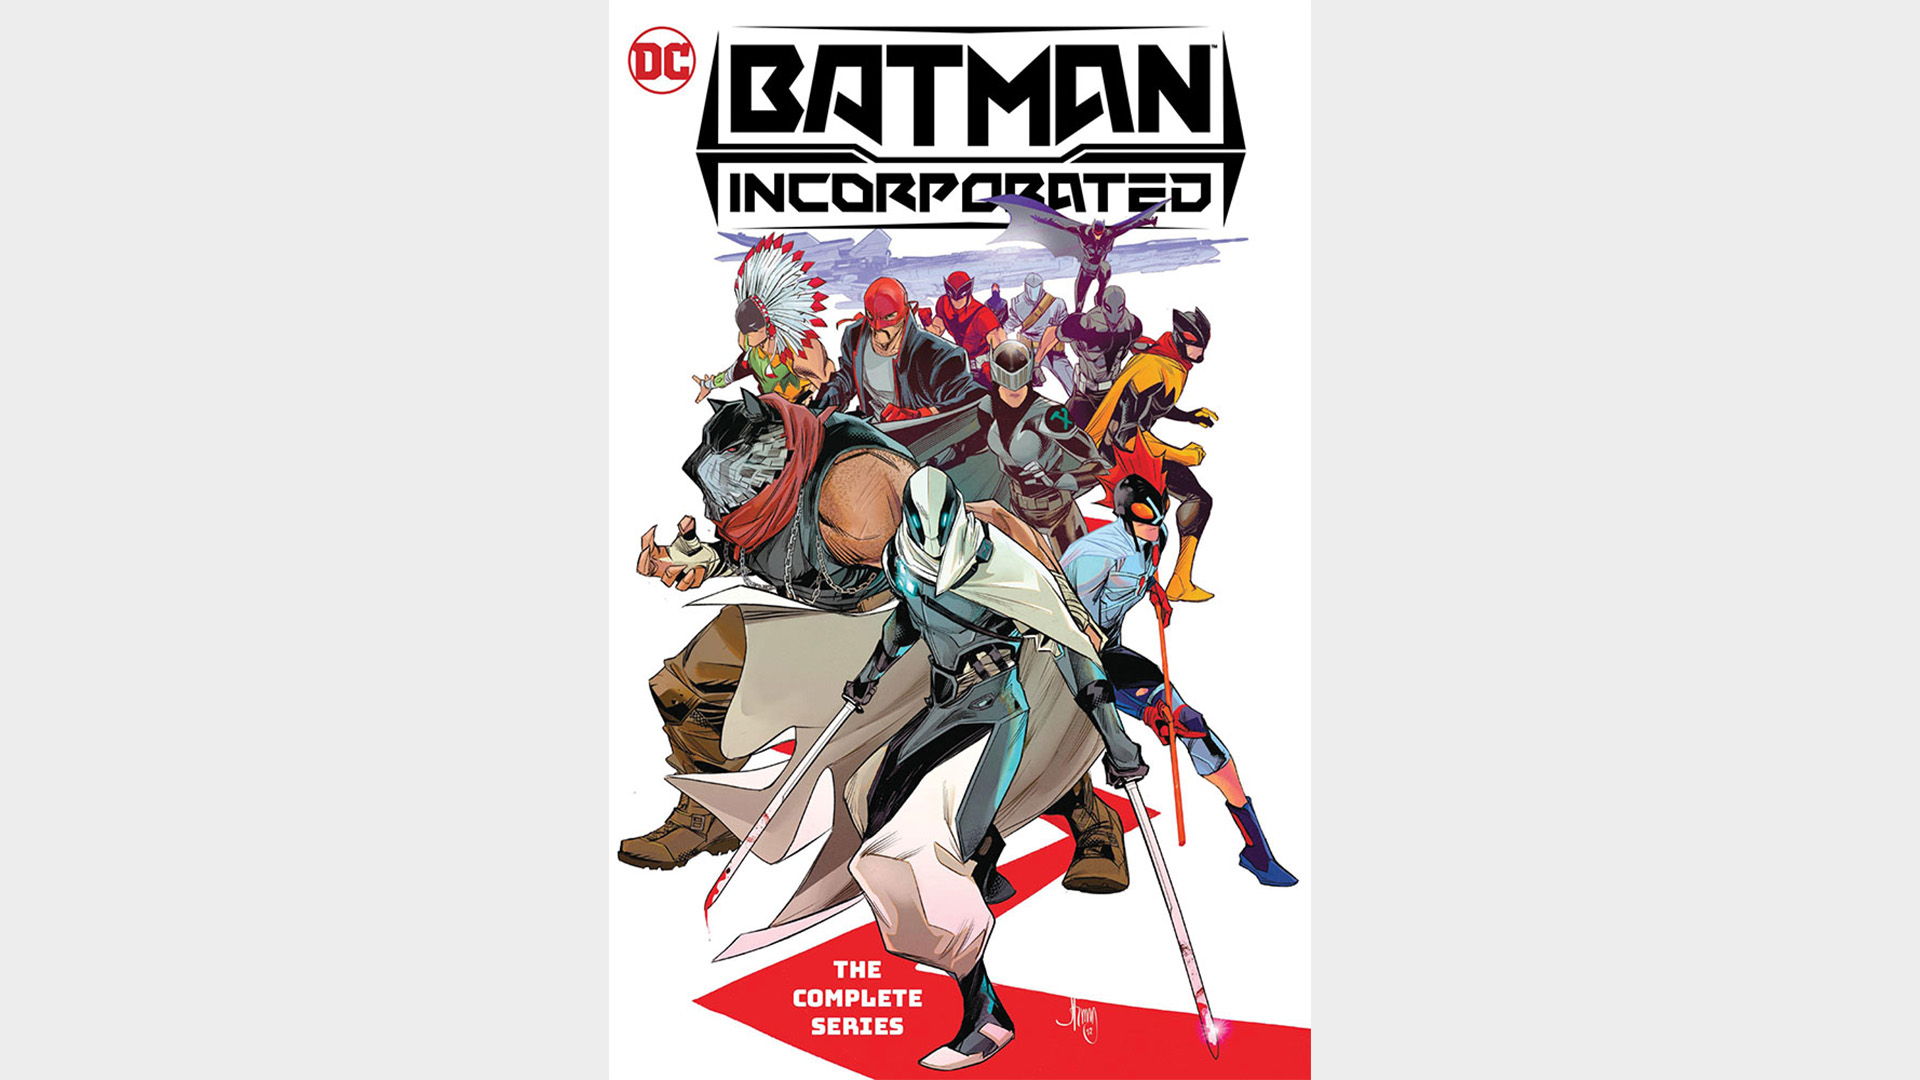 BATMAN INCORPORATED: THE COMPLETE SERIES